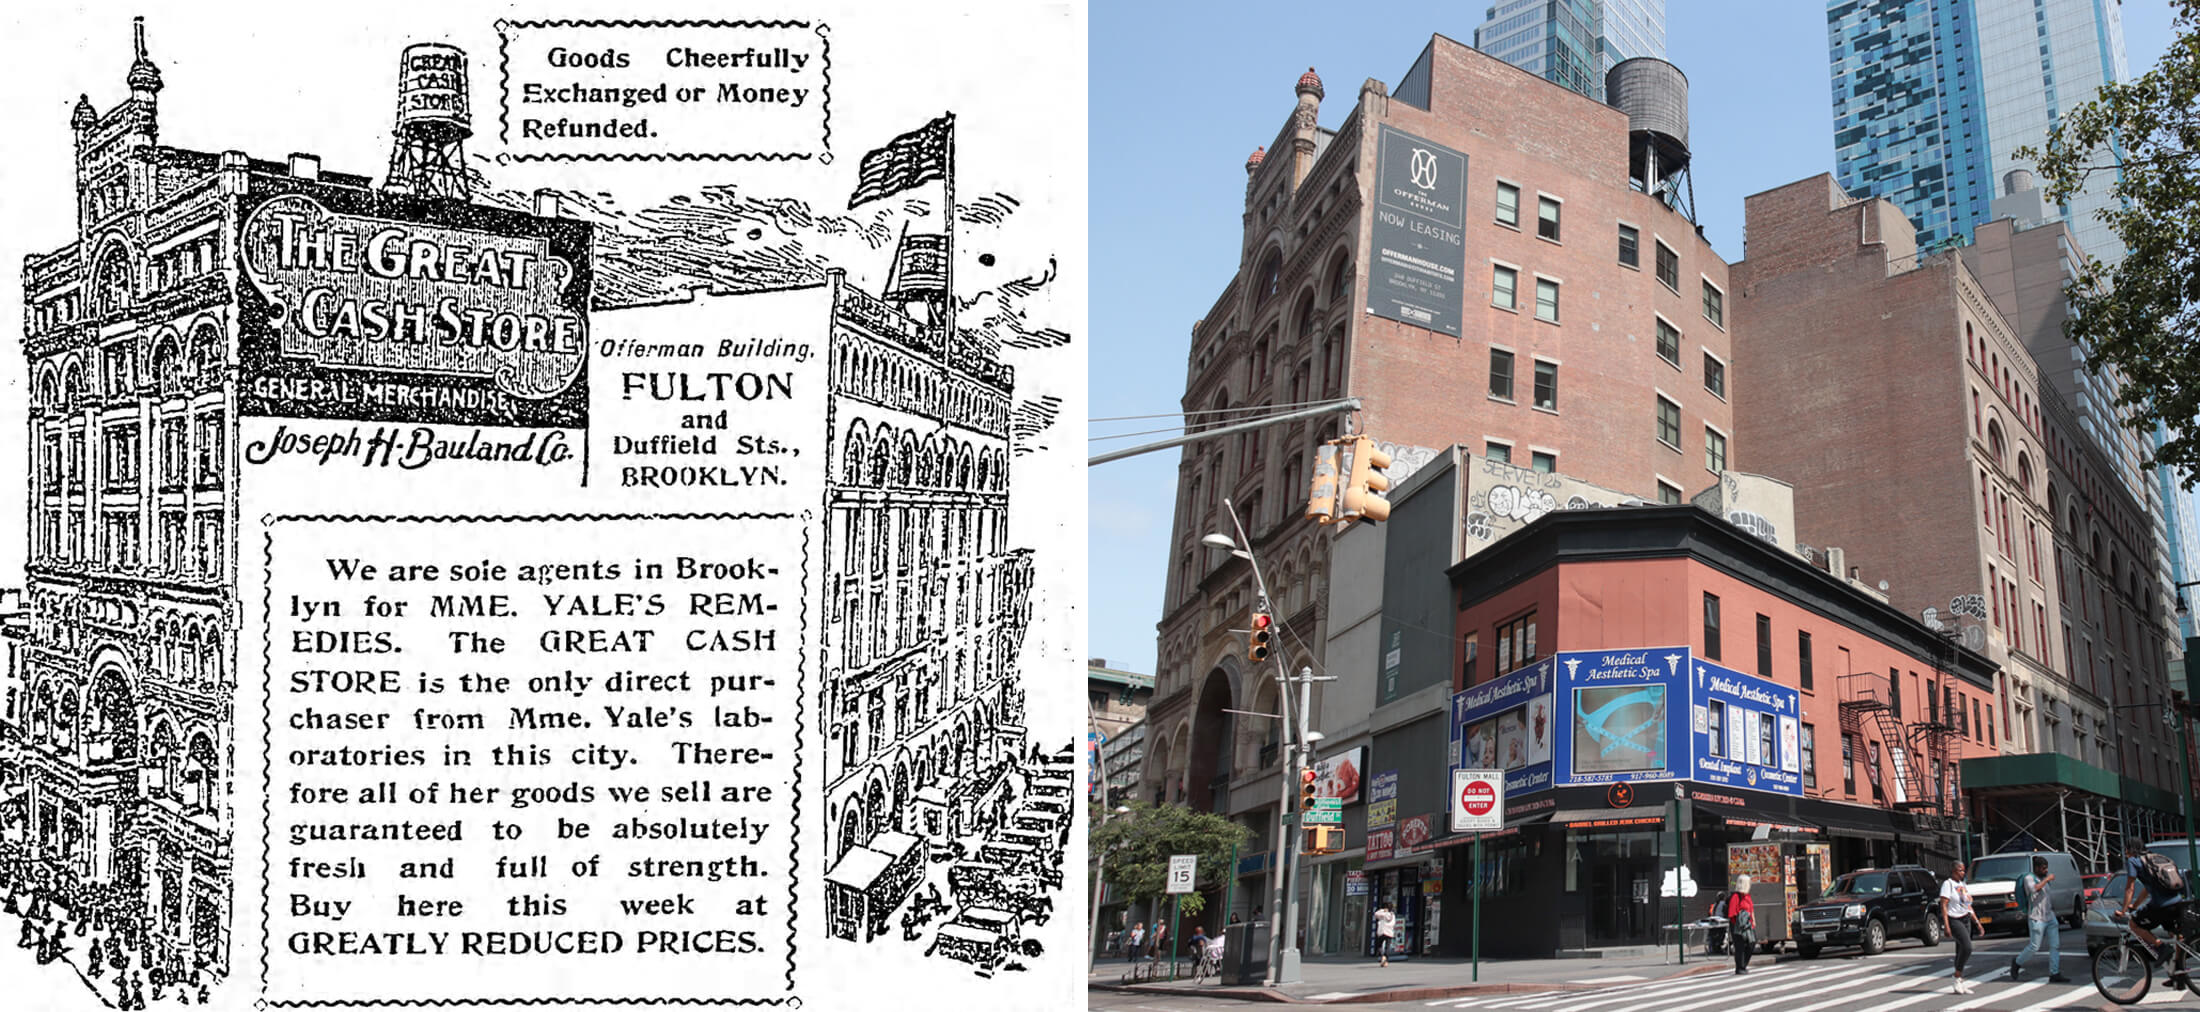 a drawing of the building in 1897 and a current view showing the corner of fulton and duffield streets